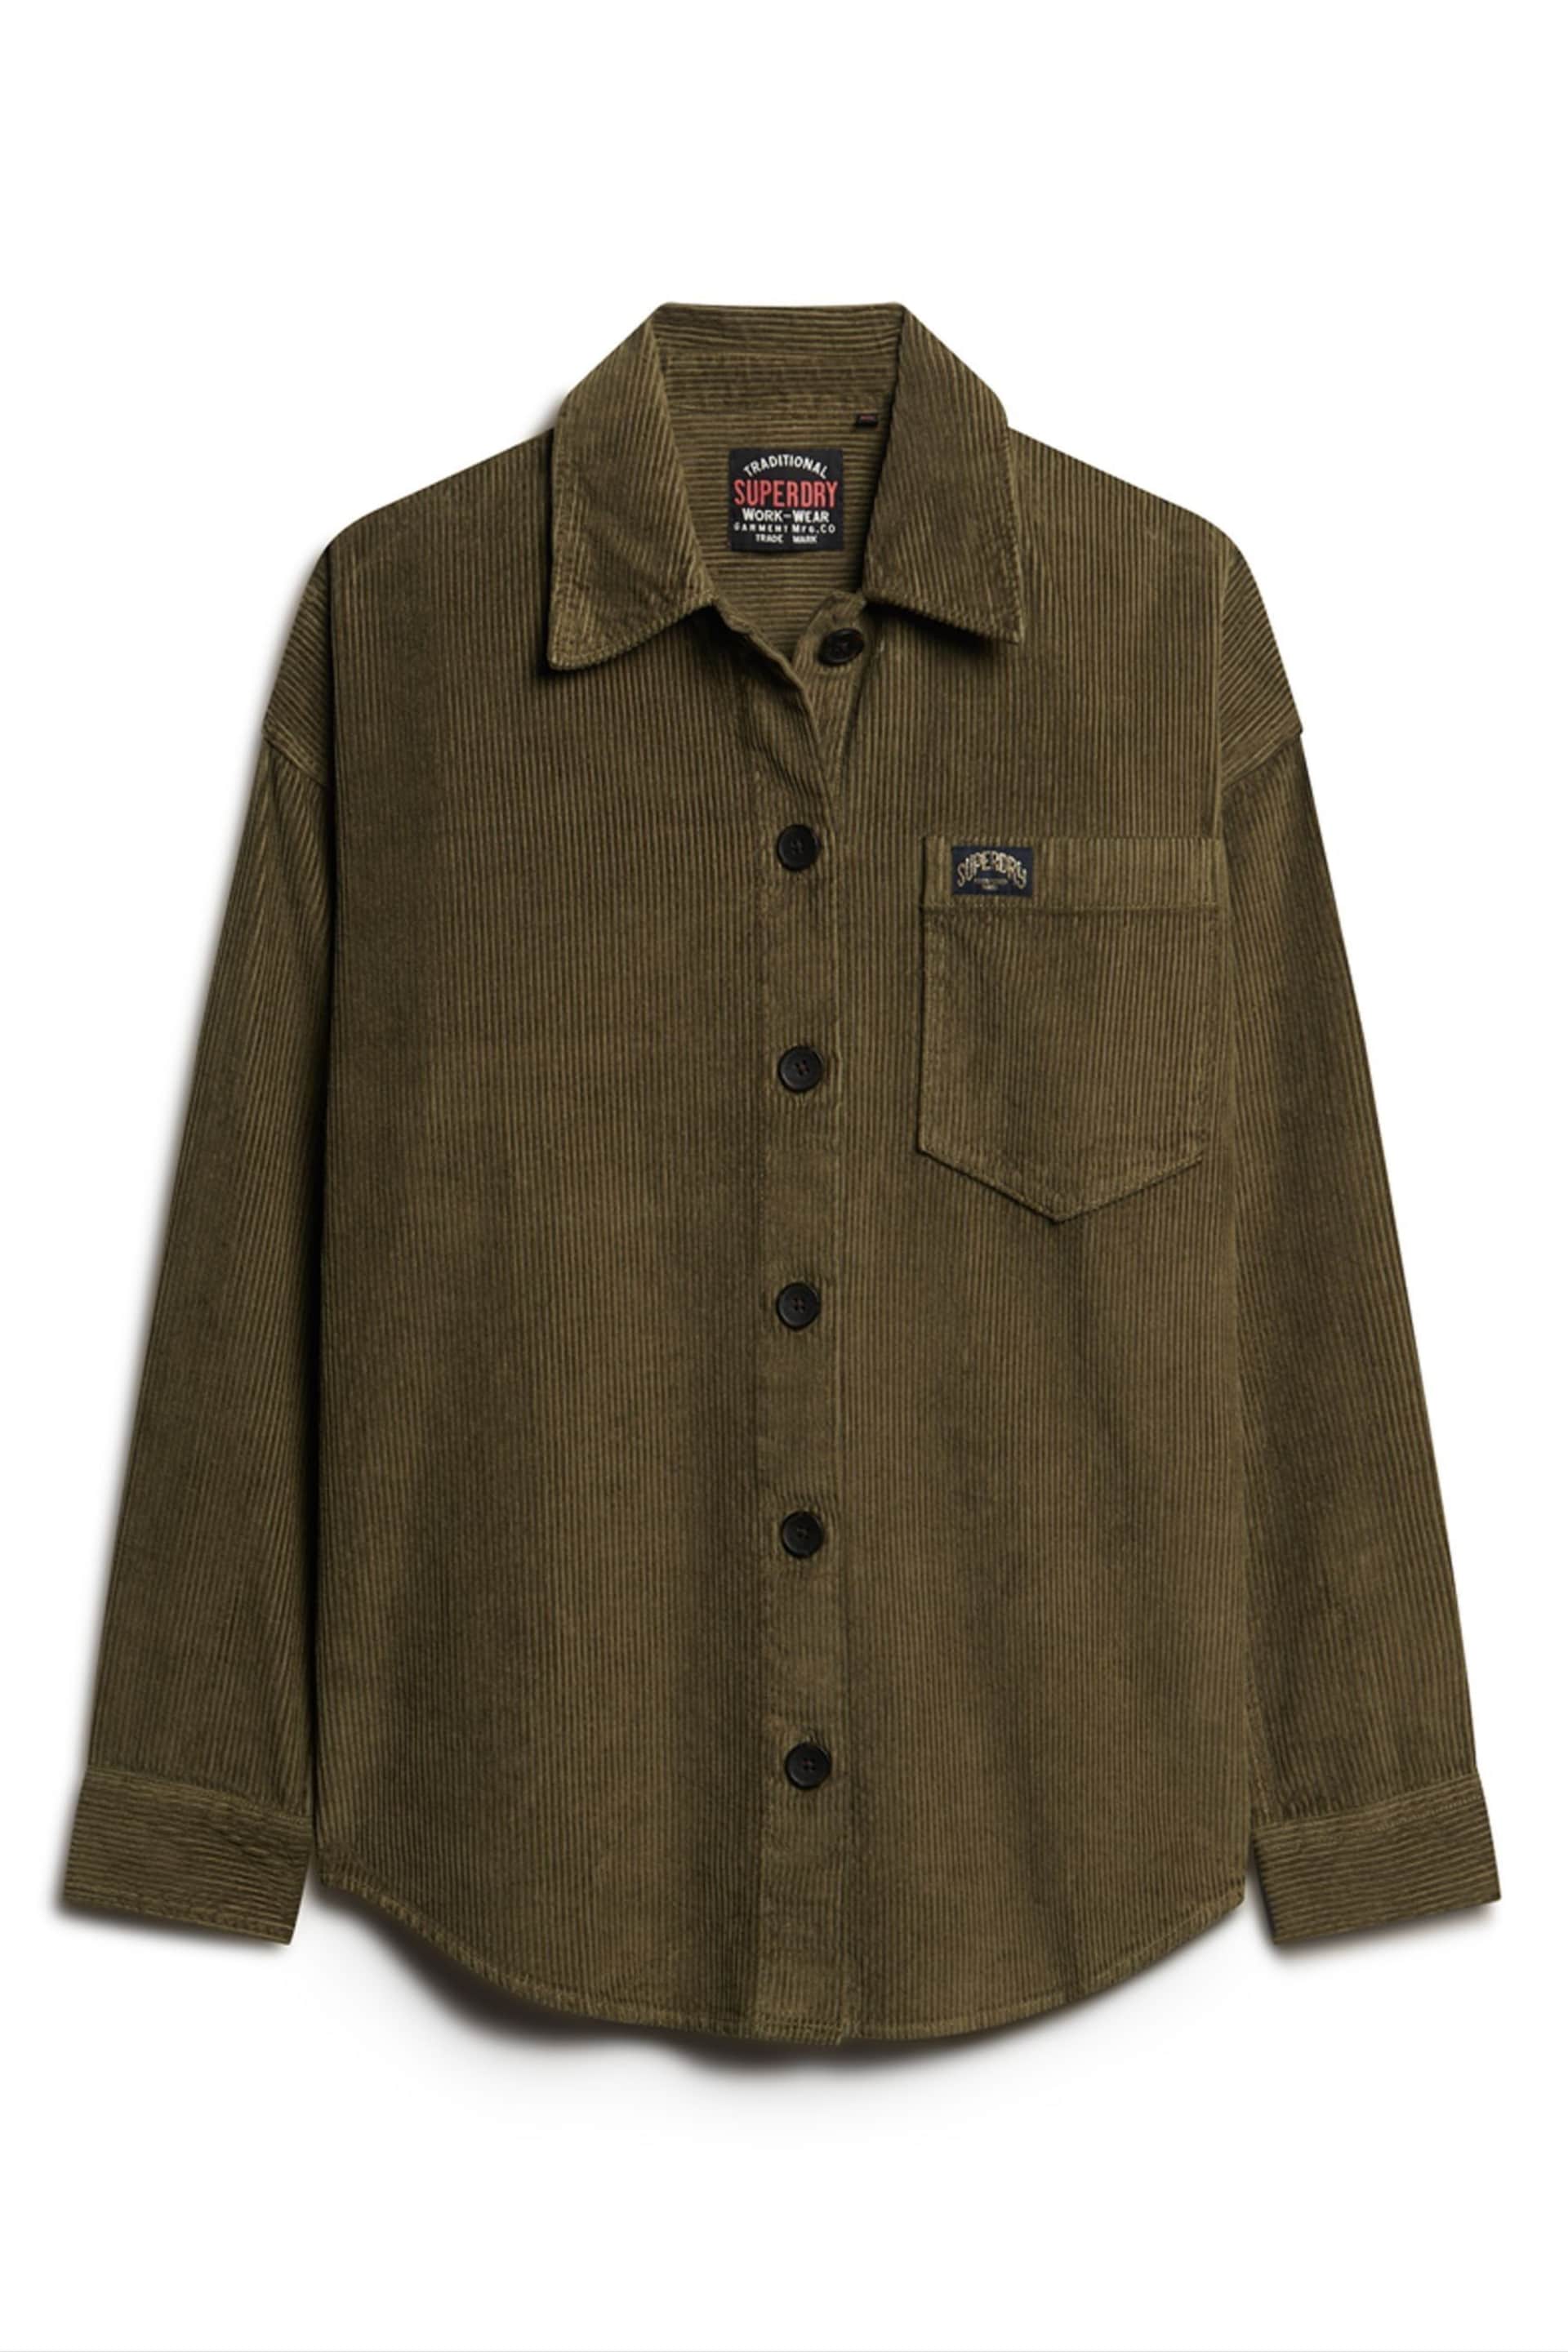 Superdry Green Chunky Cord Overshirt Jacket - Image 4 of 6